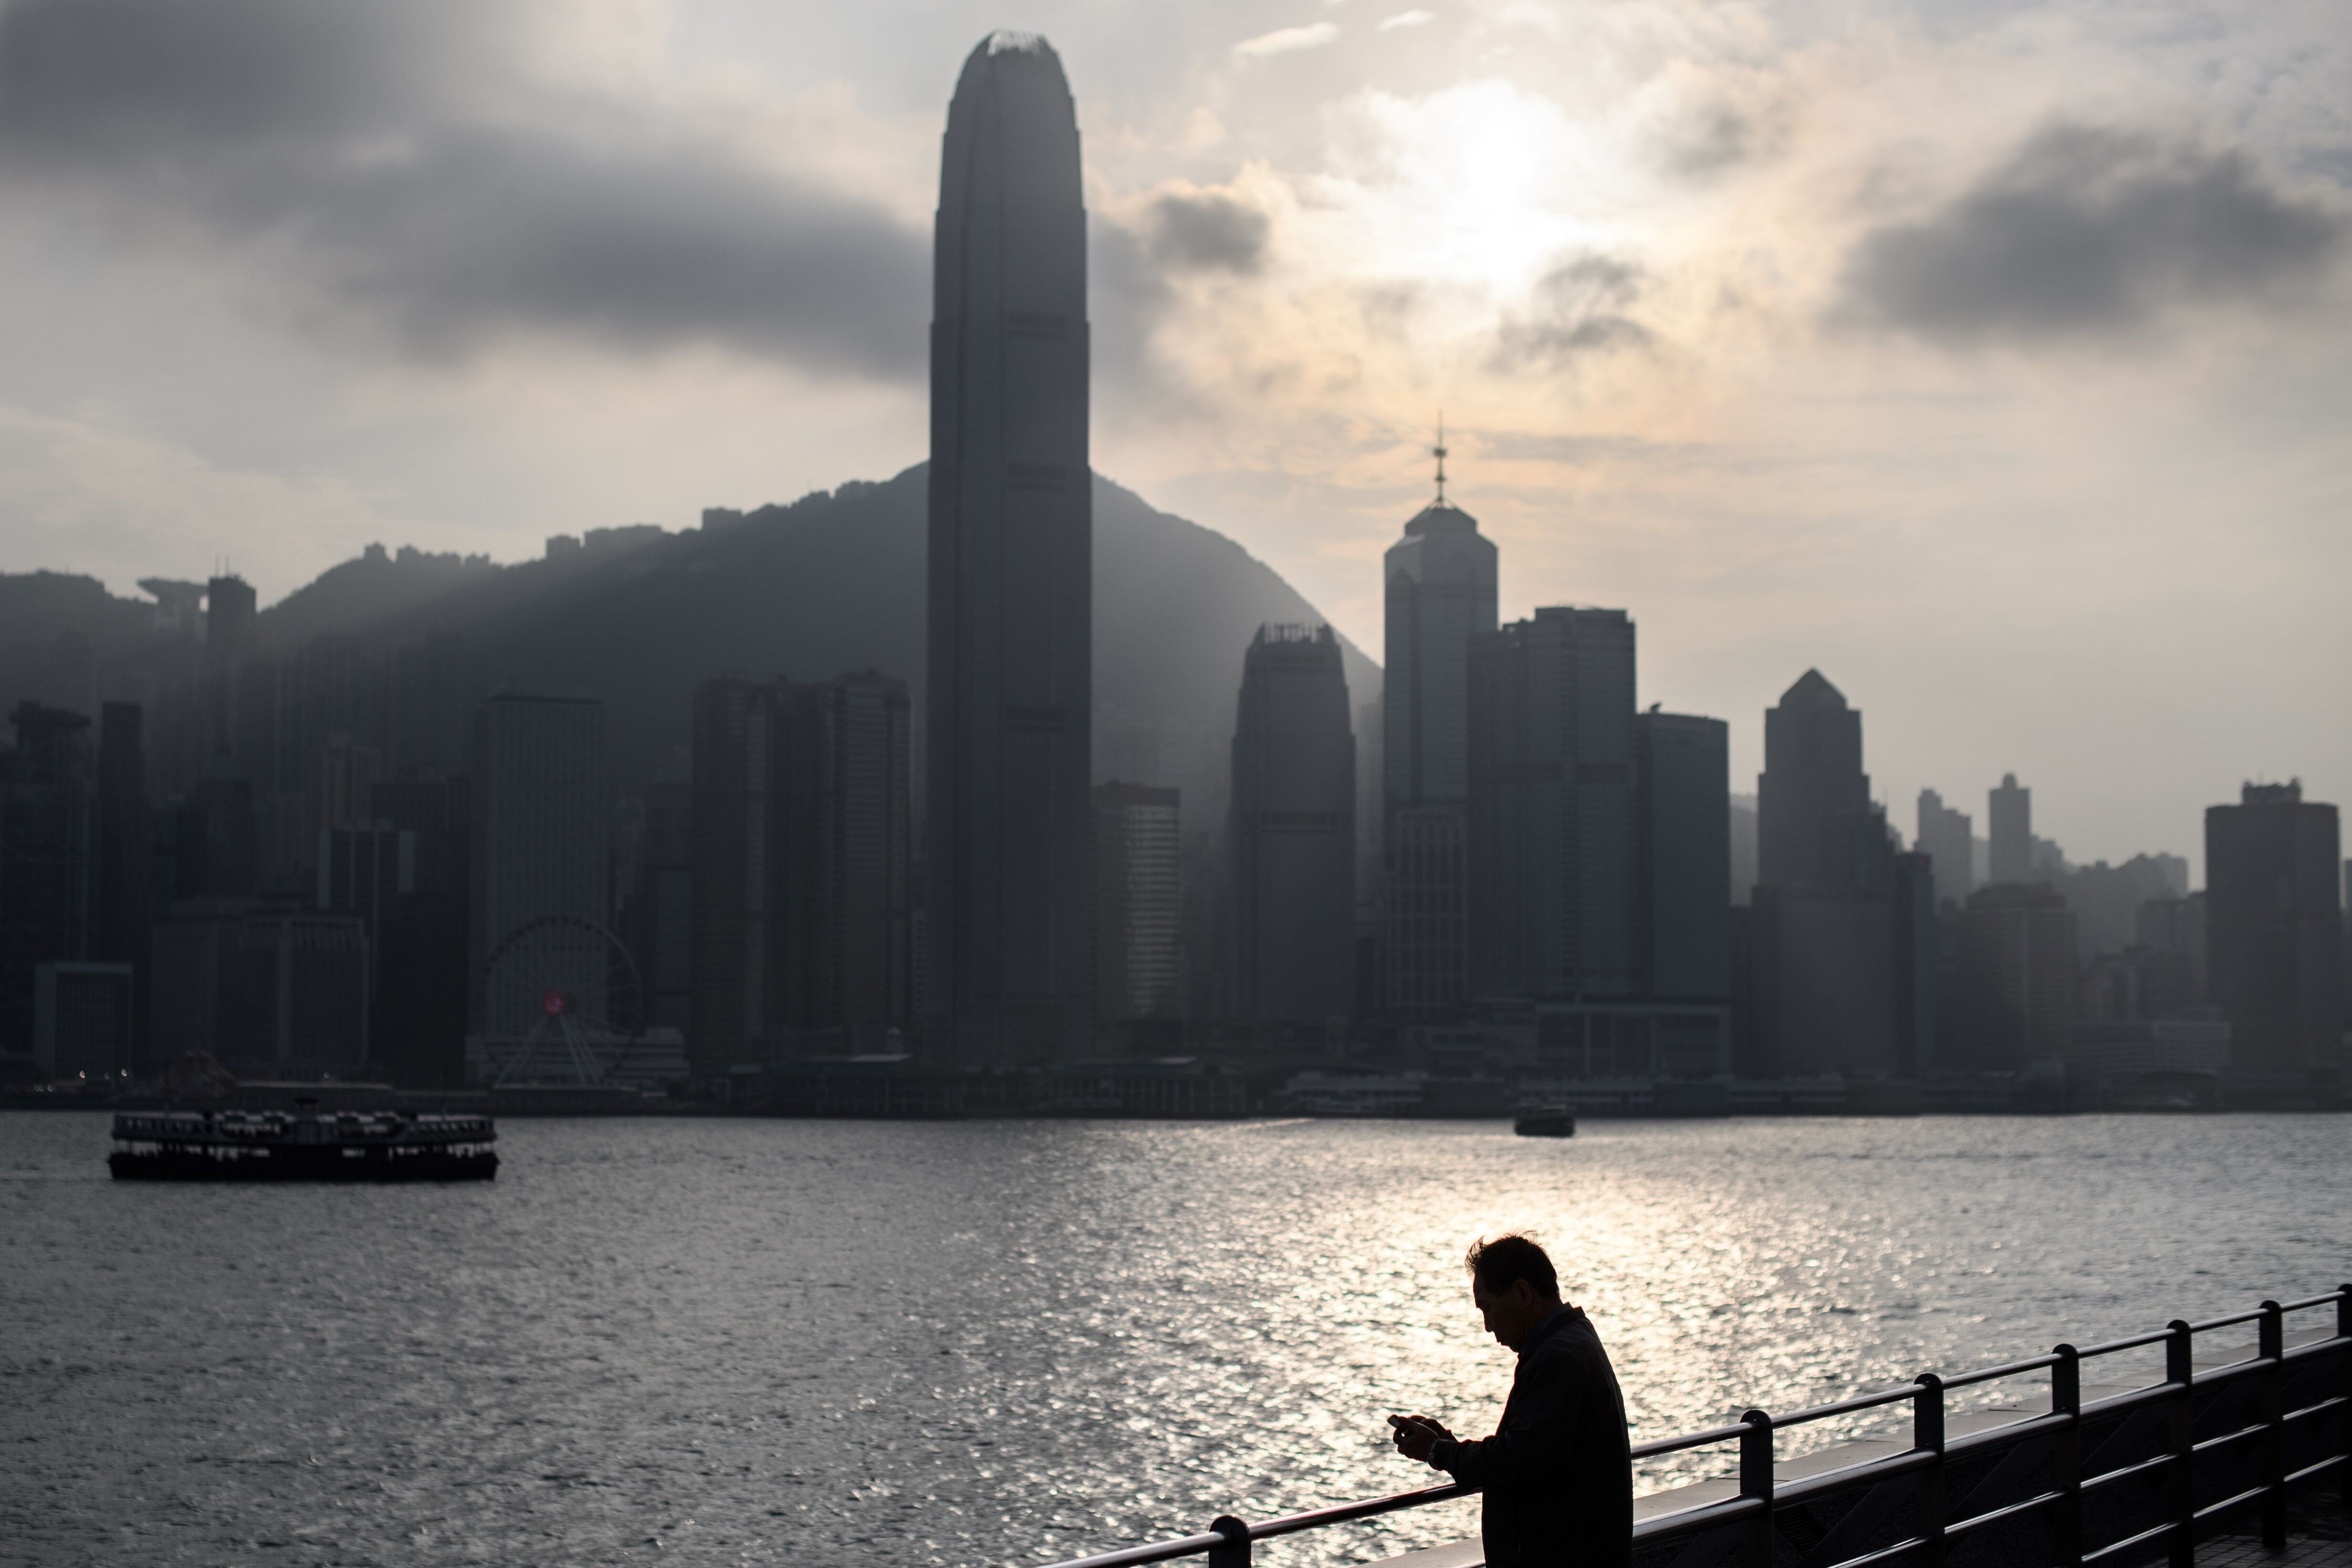 Over the past century, Hong Kong has transformed from a small fishing village into a leading international financial centre. Its remarkable success lies in its rule of law and freedoms. Photo: AFP